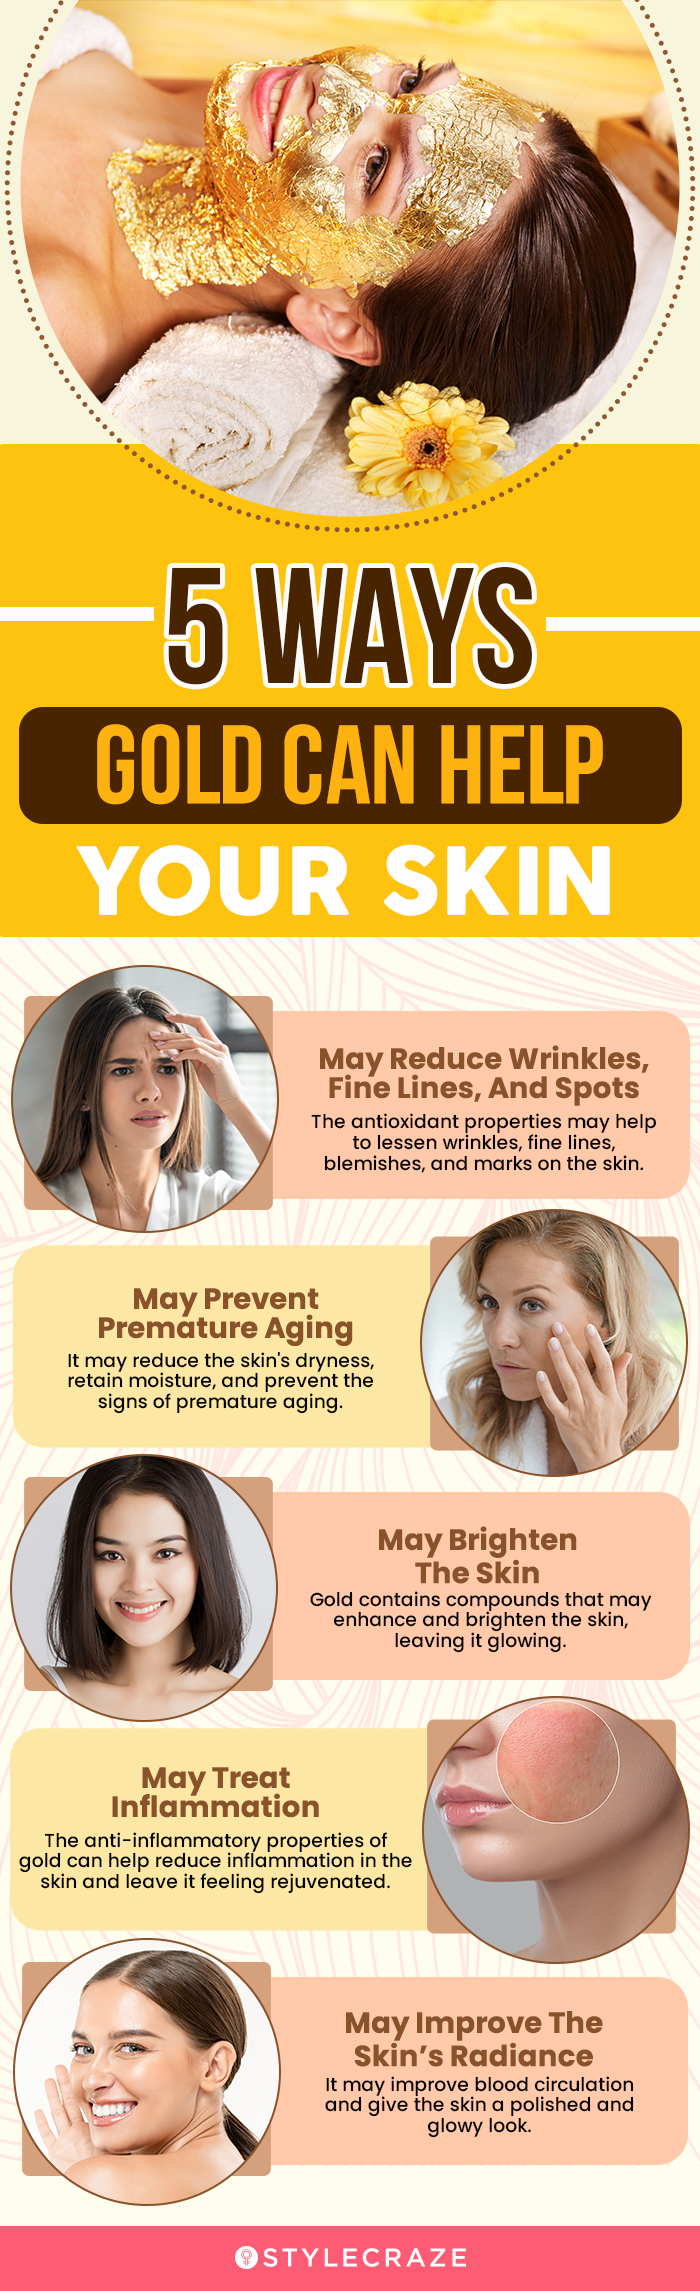 top 5 benefits of gold for skin care (infographic)